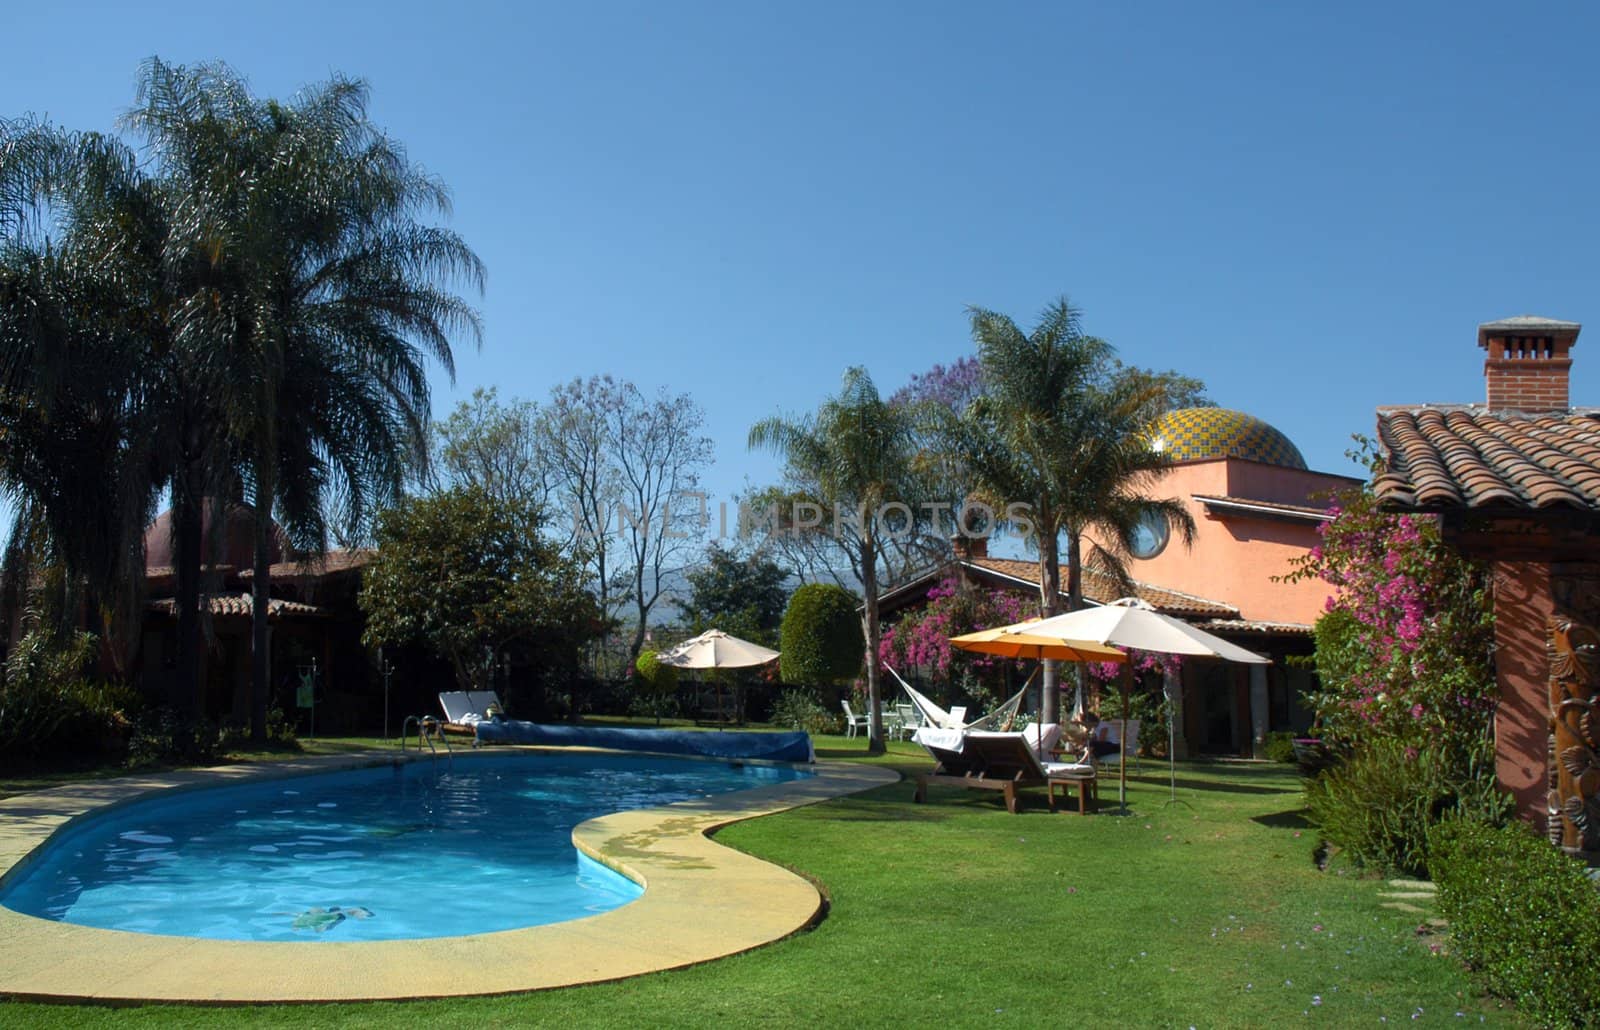 Hotel with swimming pool and palms in the garden